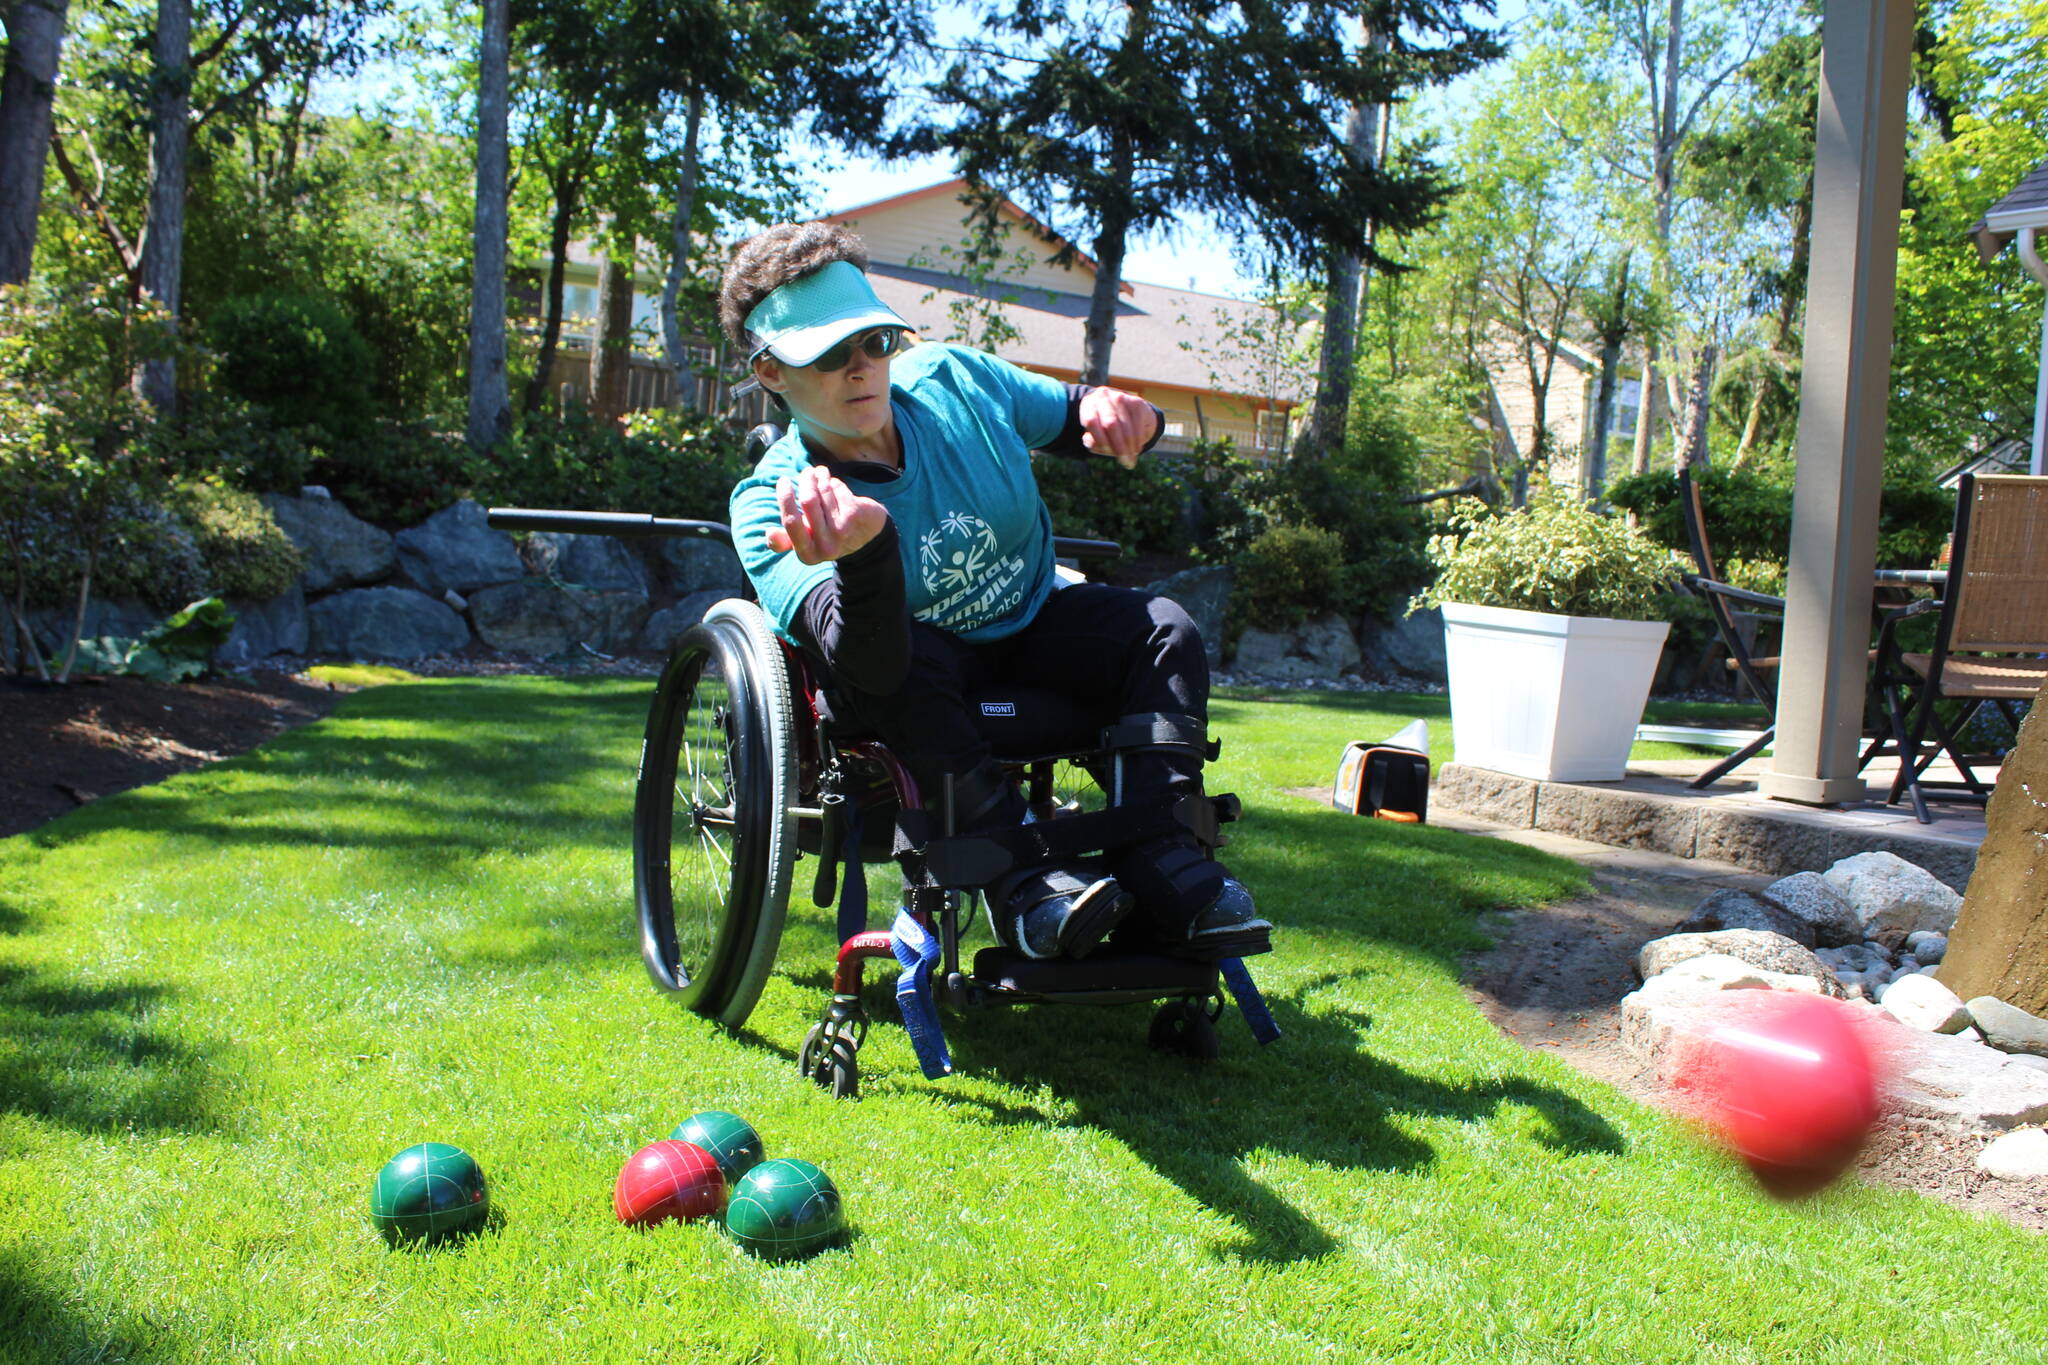 Jacquelyn Diaz practices bocce at her home in Oak Harbor in preparation for the Special Olympics USA Games next month. (Photo by Karina Andrew/Whidbey News-Times)